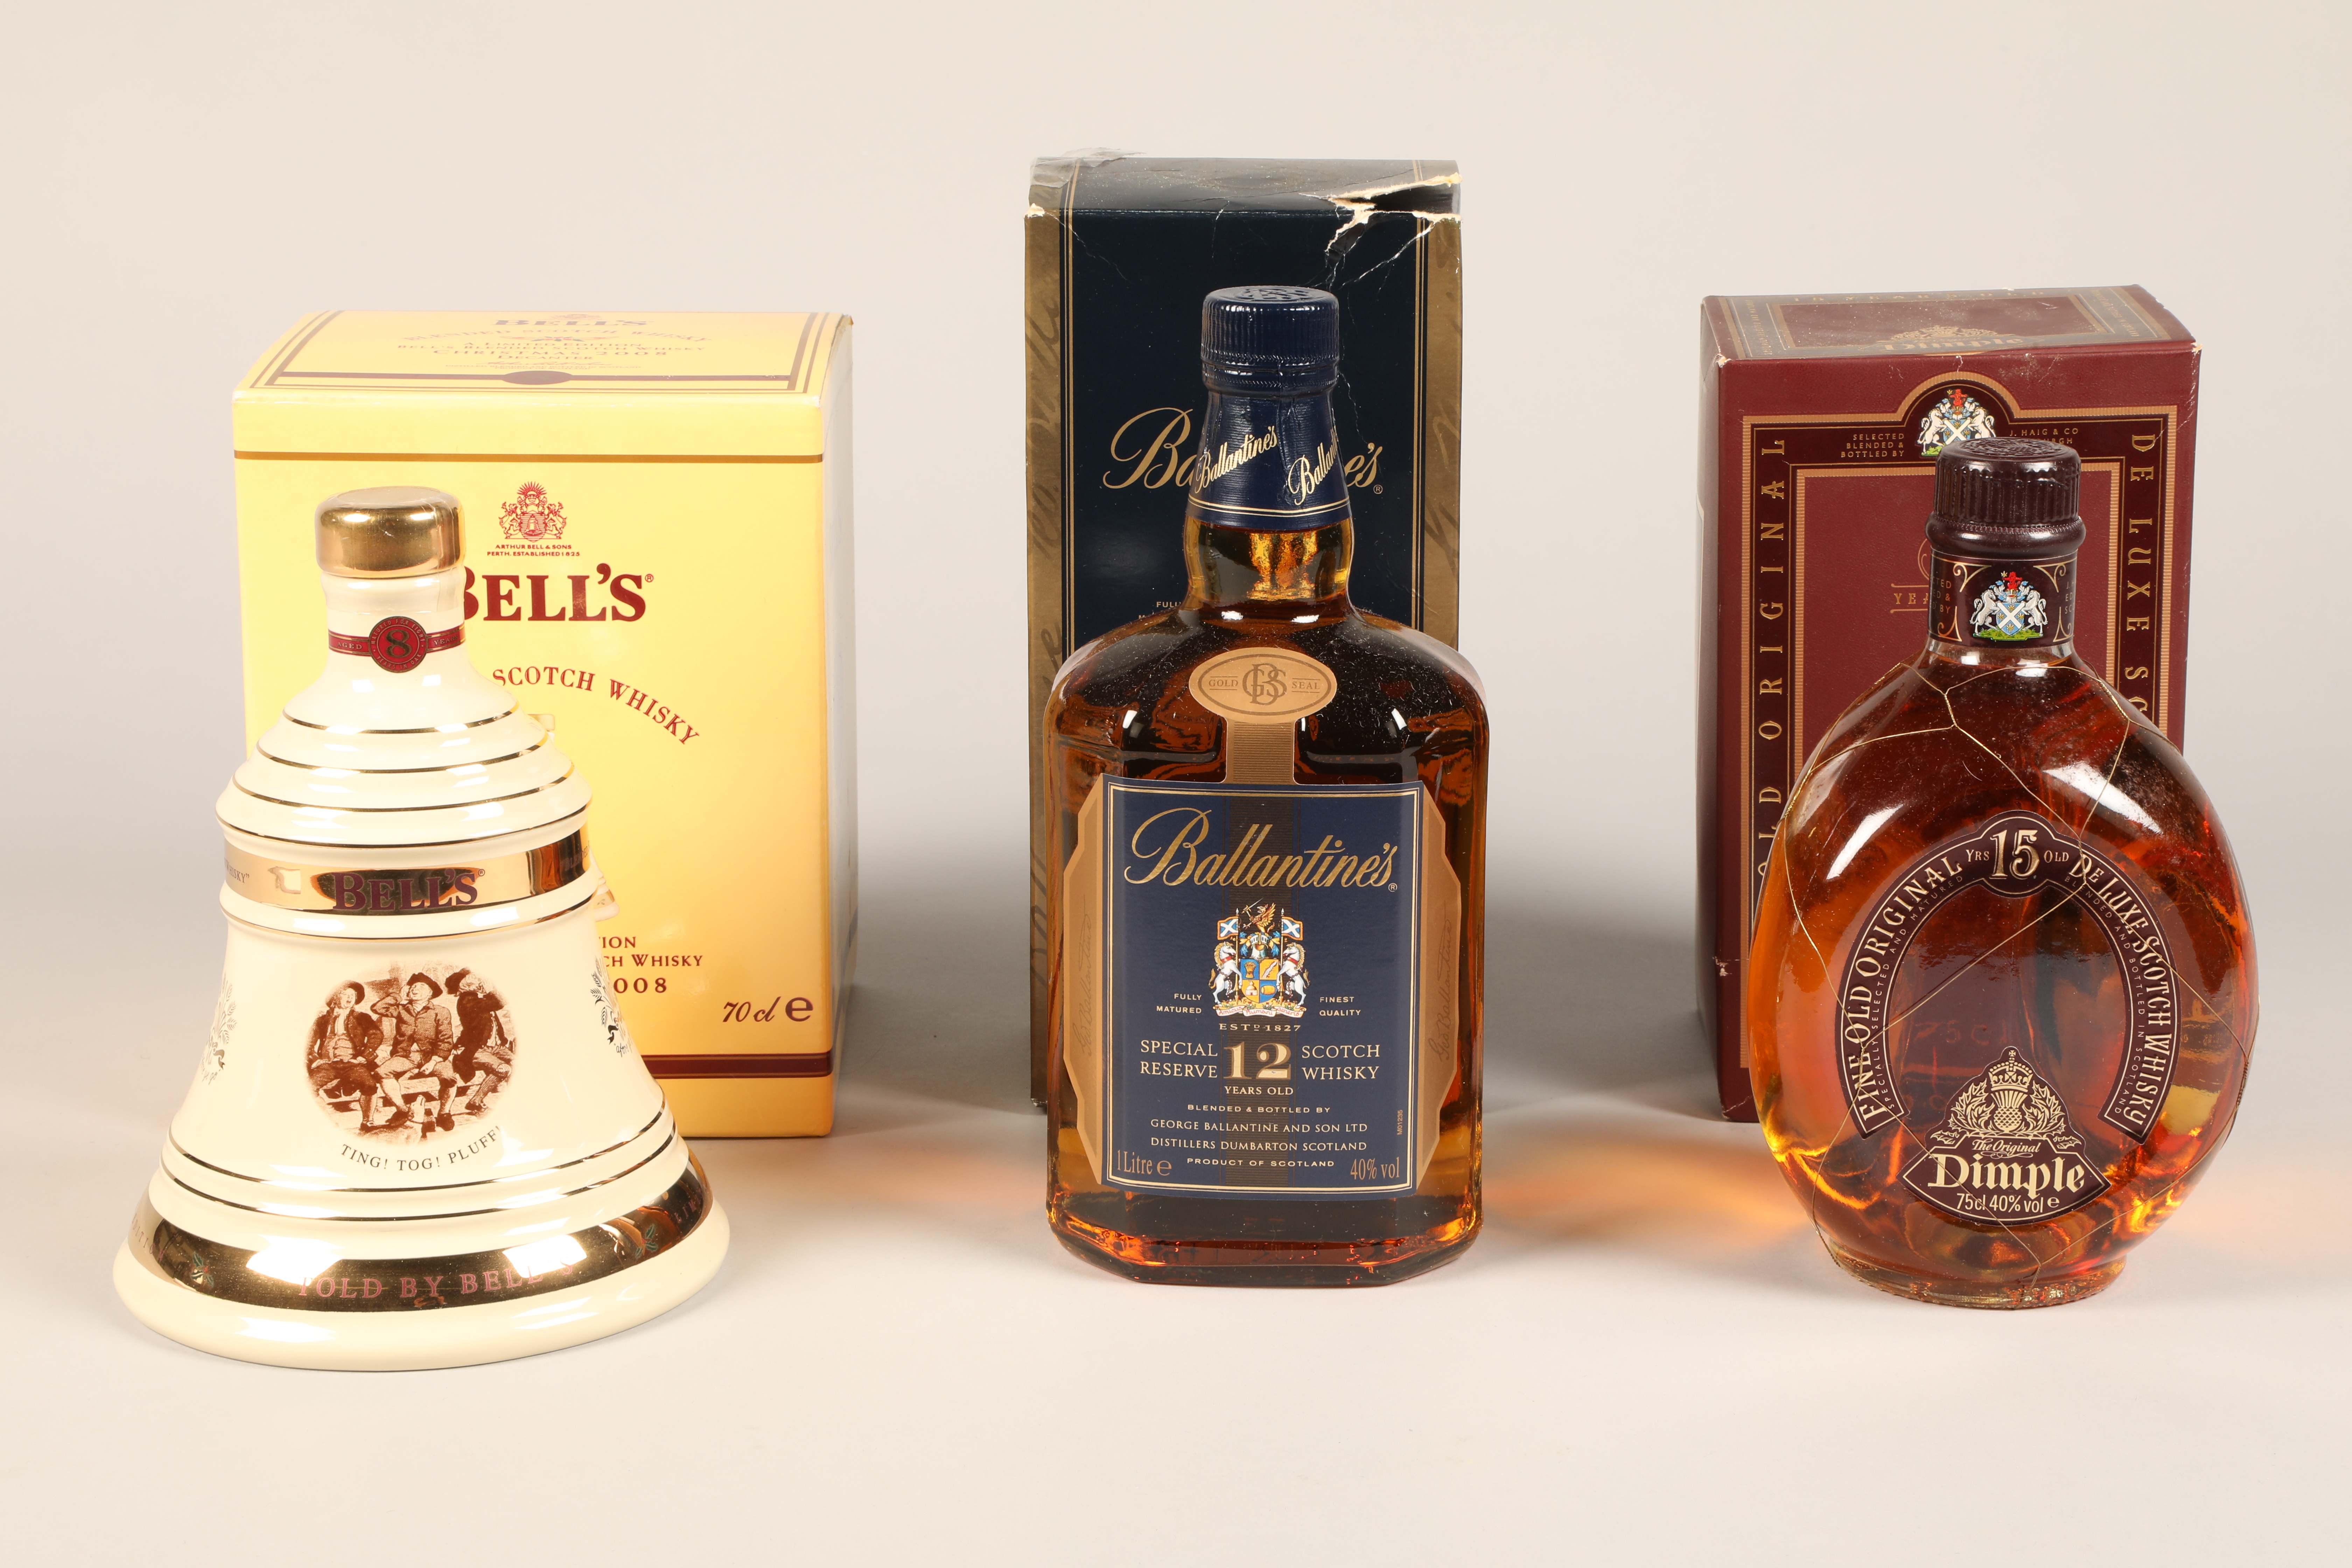 Bells blended Scotch whisky Christmas decanter 2008, 70cl, 40% vol with cardboard box Ballantines